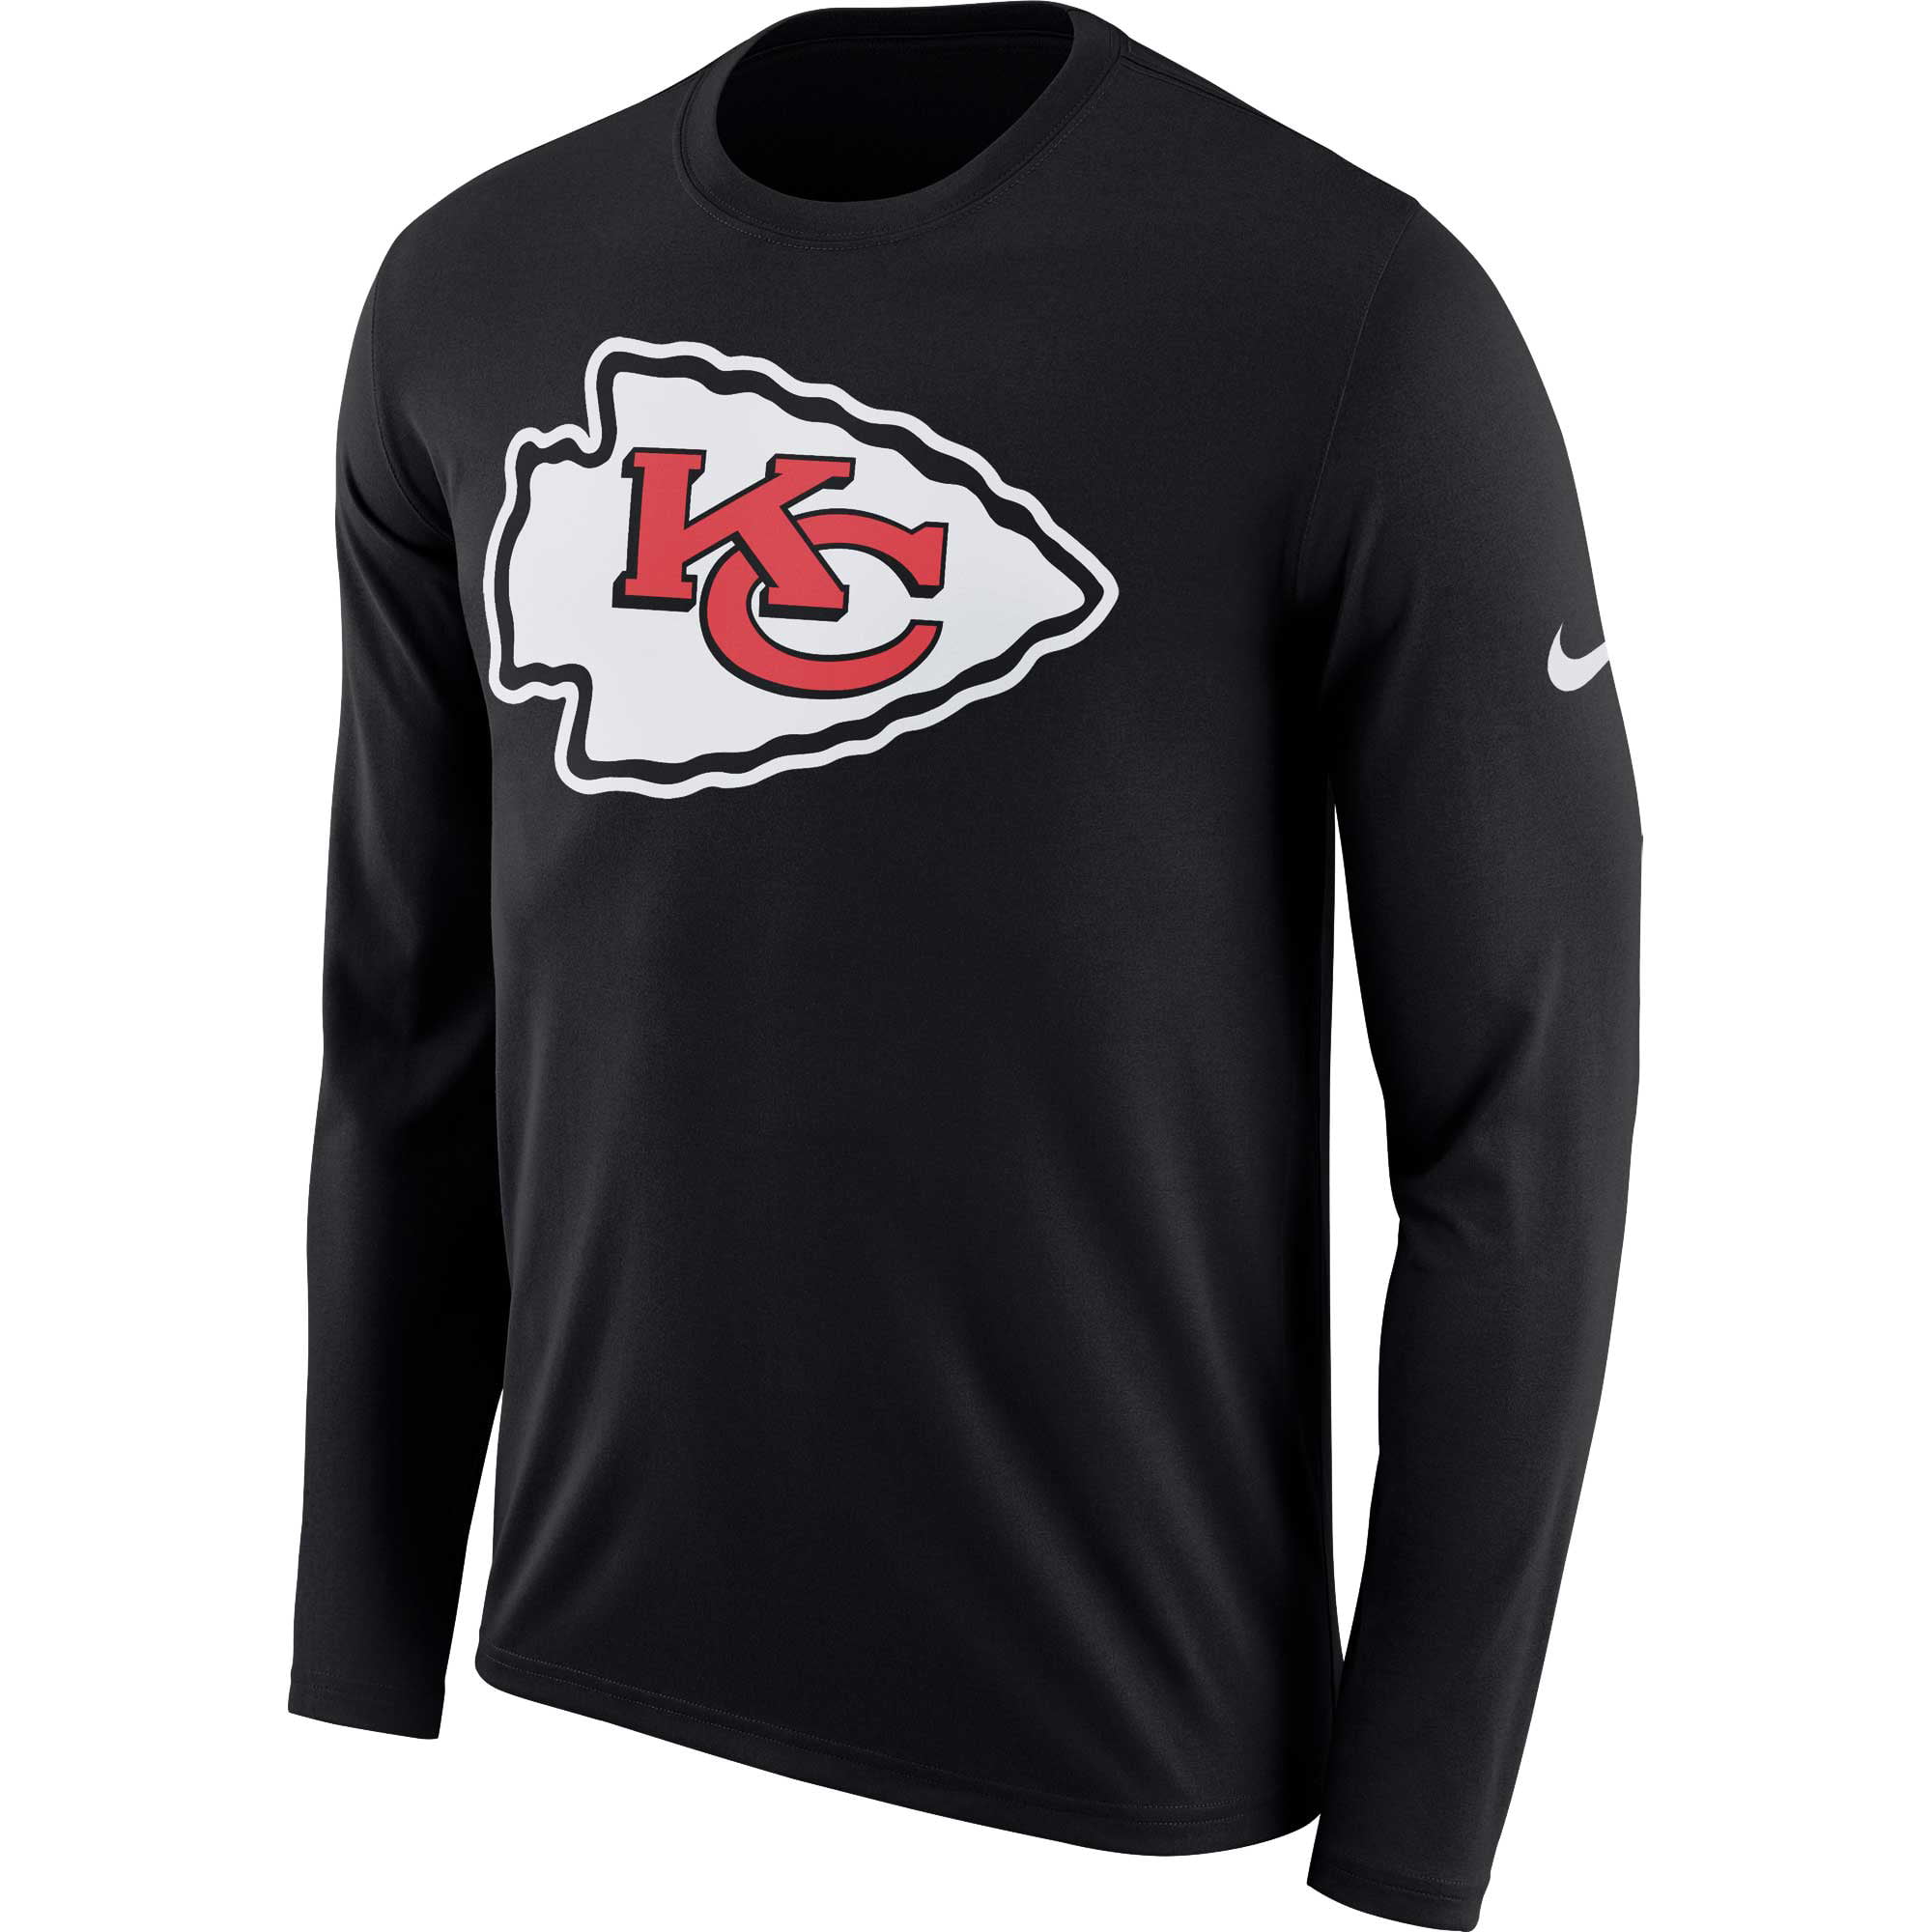 kc chiefs shirts for sale